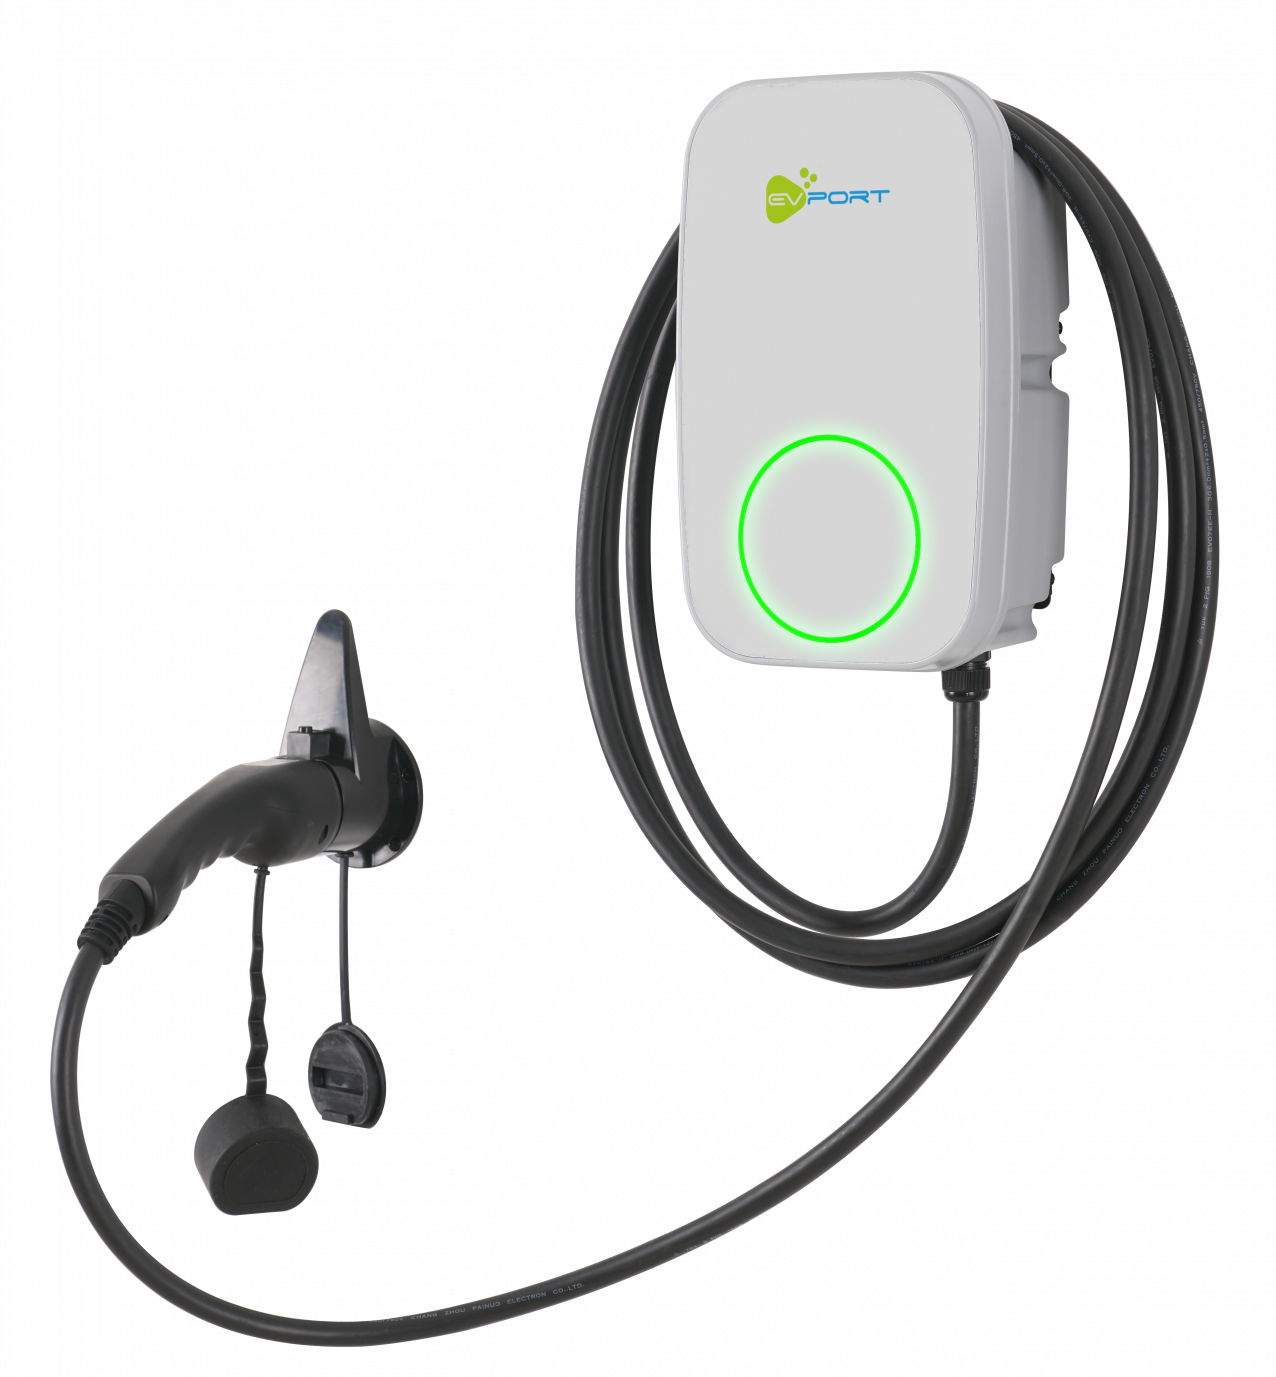 EVPORT Home EV Charger AC 7.4kW Smart Tethered